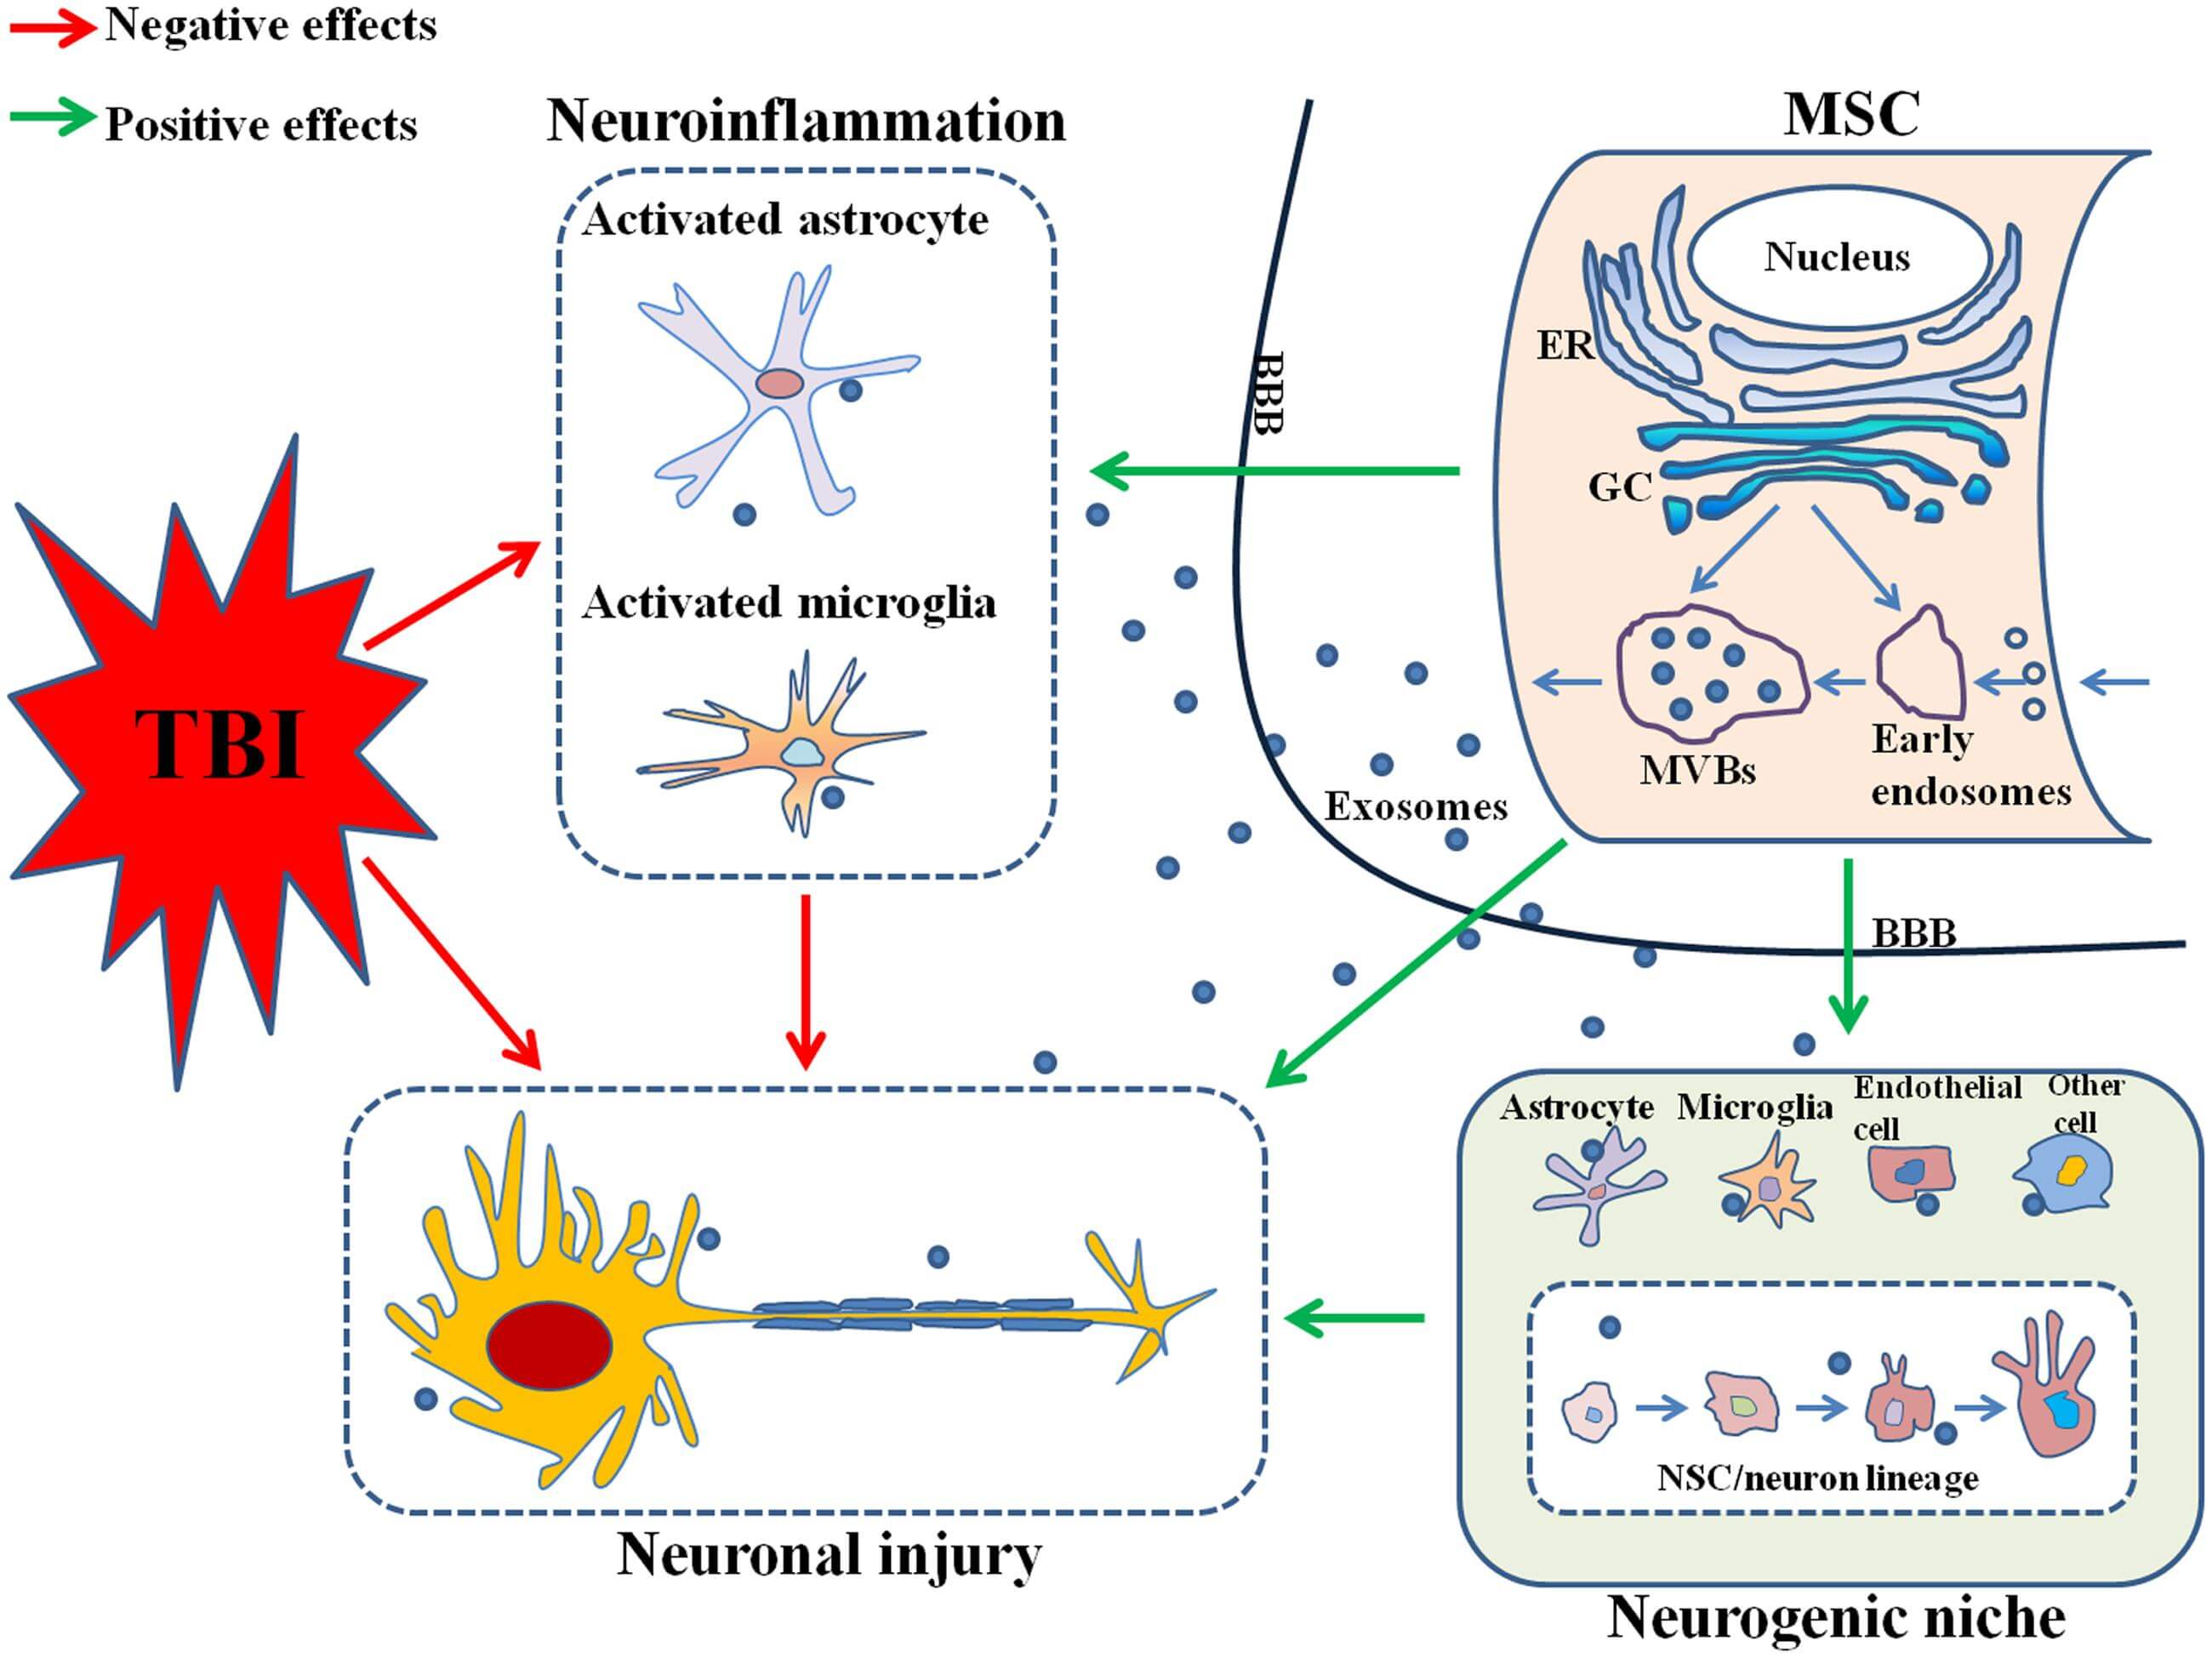 Exosomes help nerve tissue repair and function recovery after TBI.